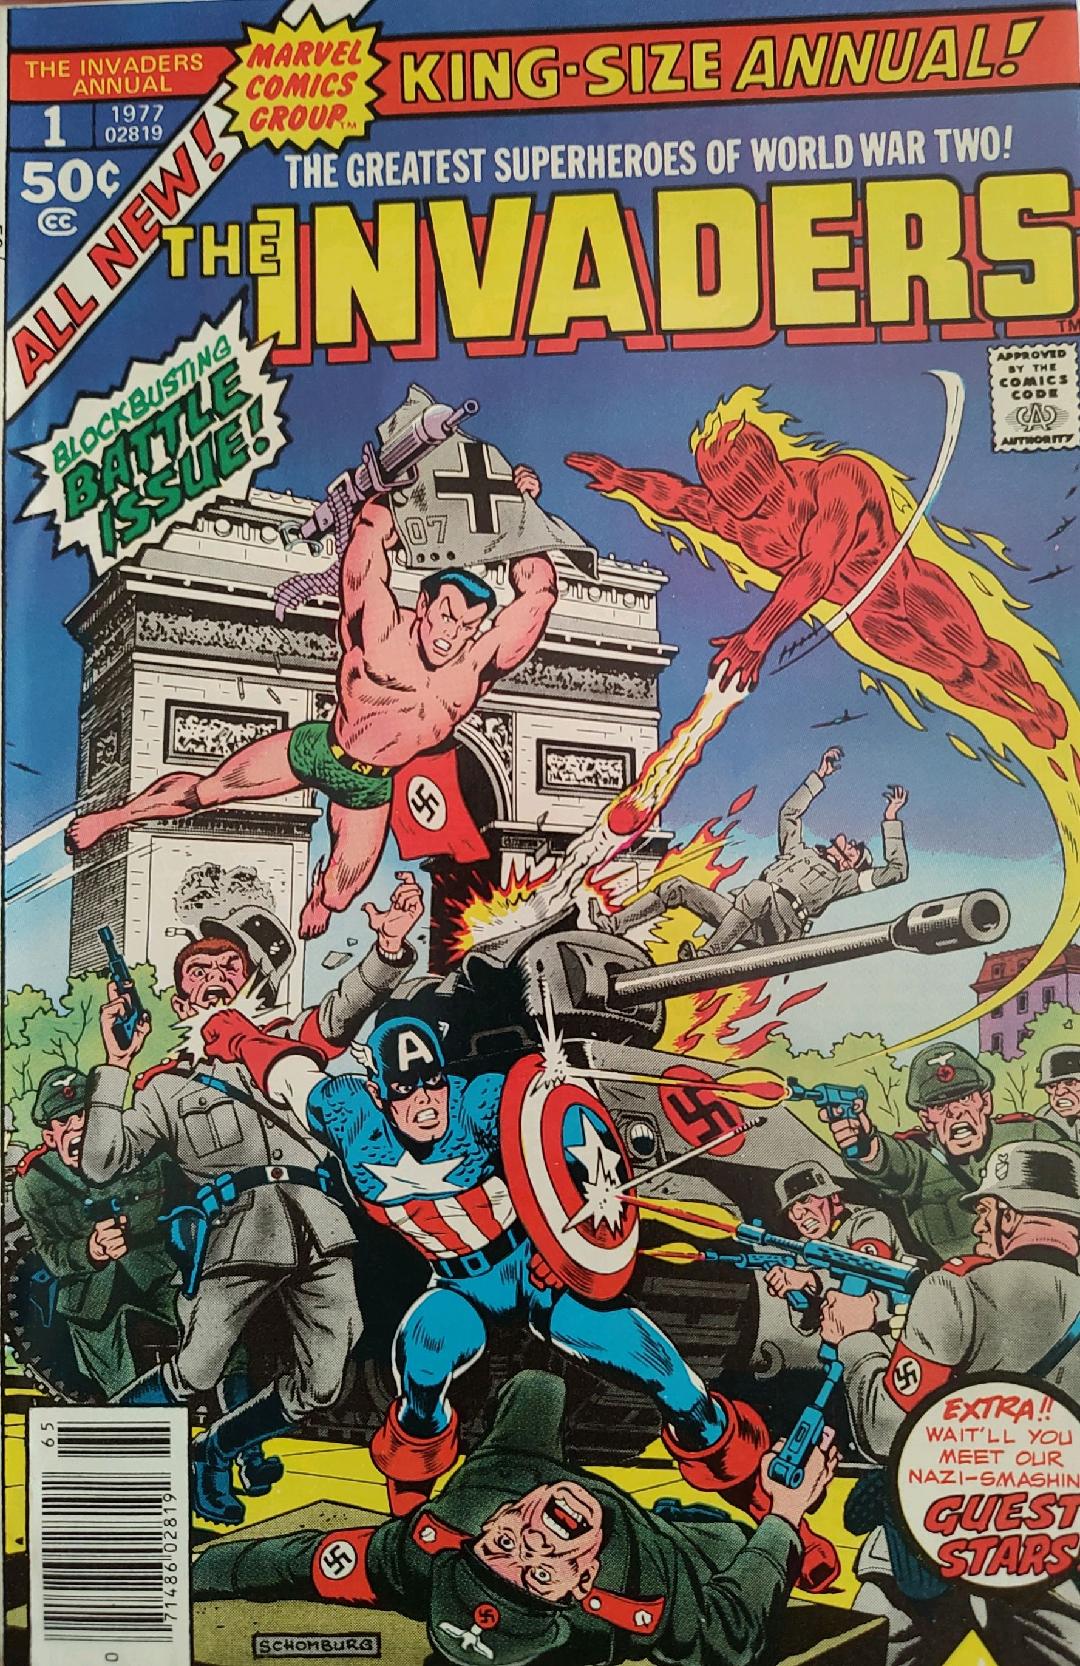 The Invaders Annual #1 Comic Book Cover